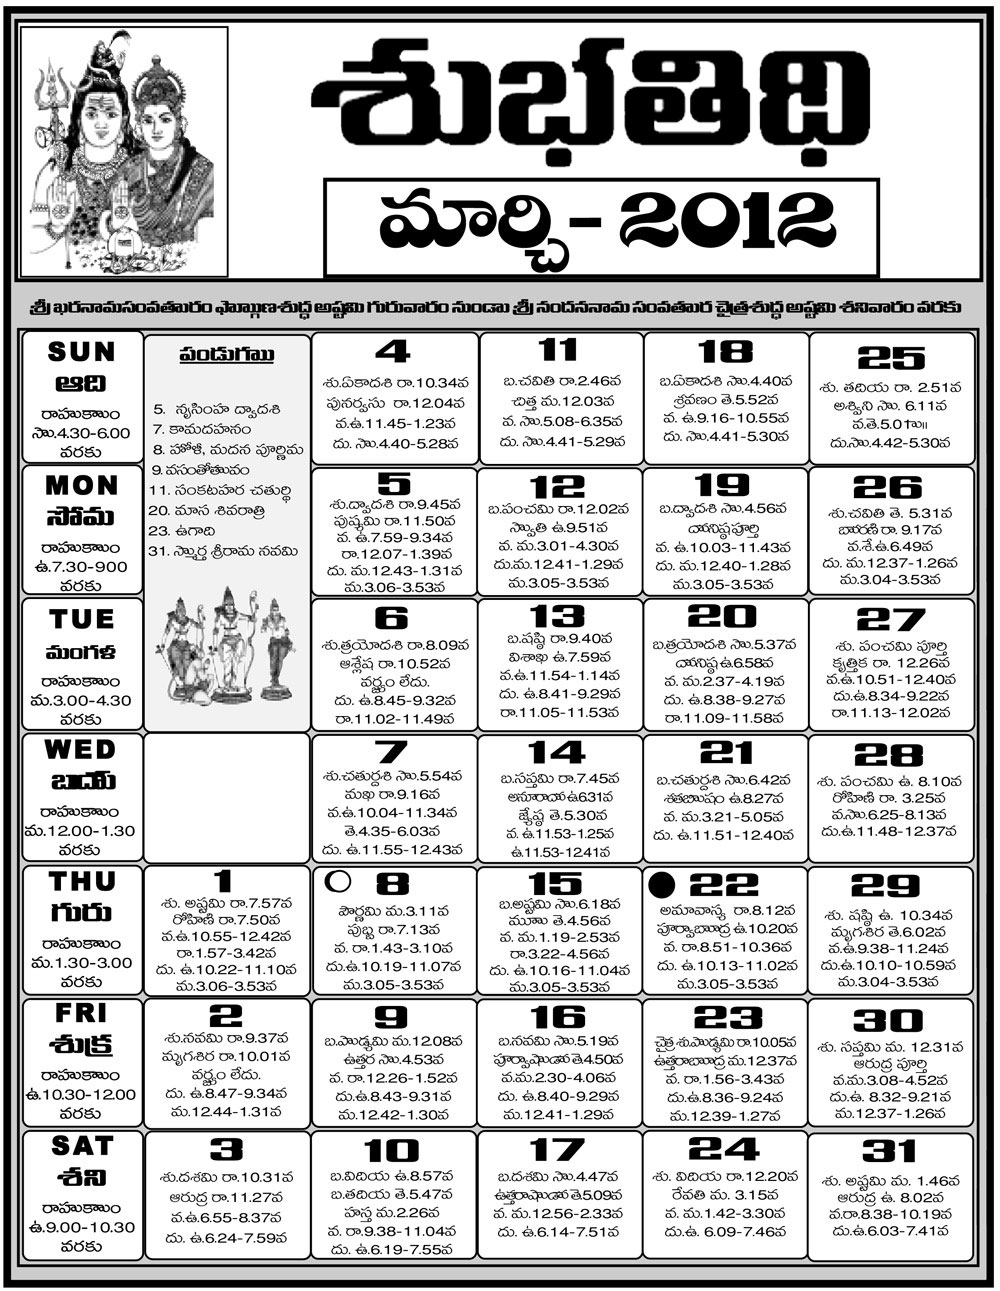 Telugu Calendar 2012 | Telugu Calendar 2011 | Telugu Calendar 2010 intended for Hindu Calendar With Tithi 2012 March